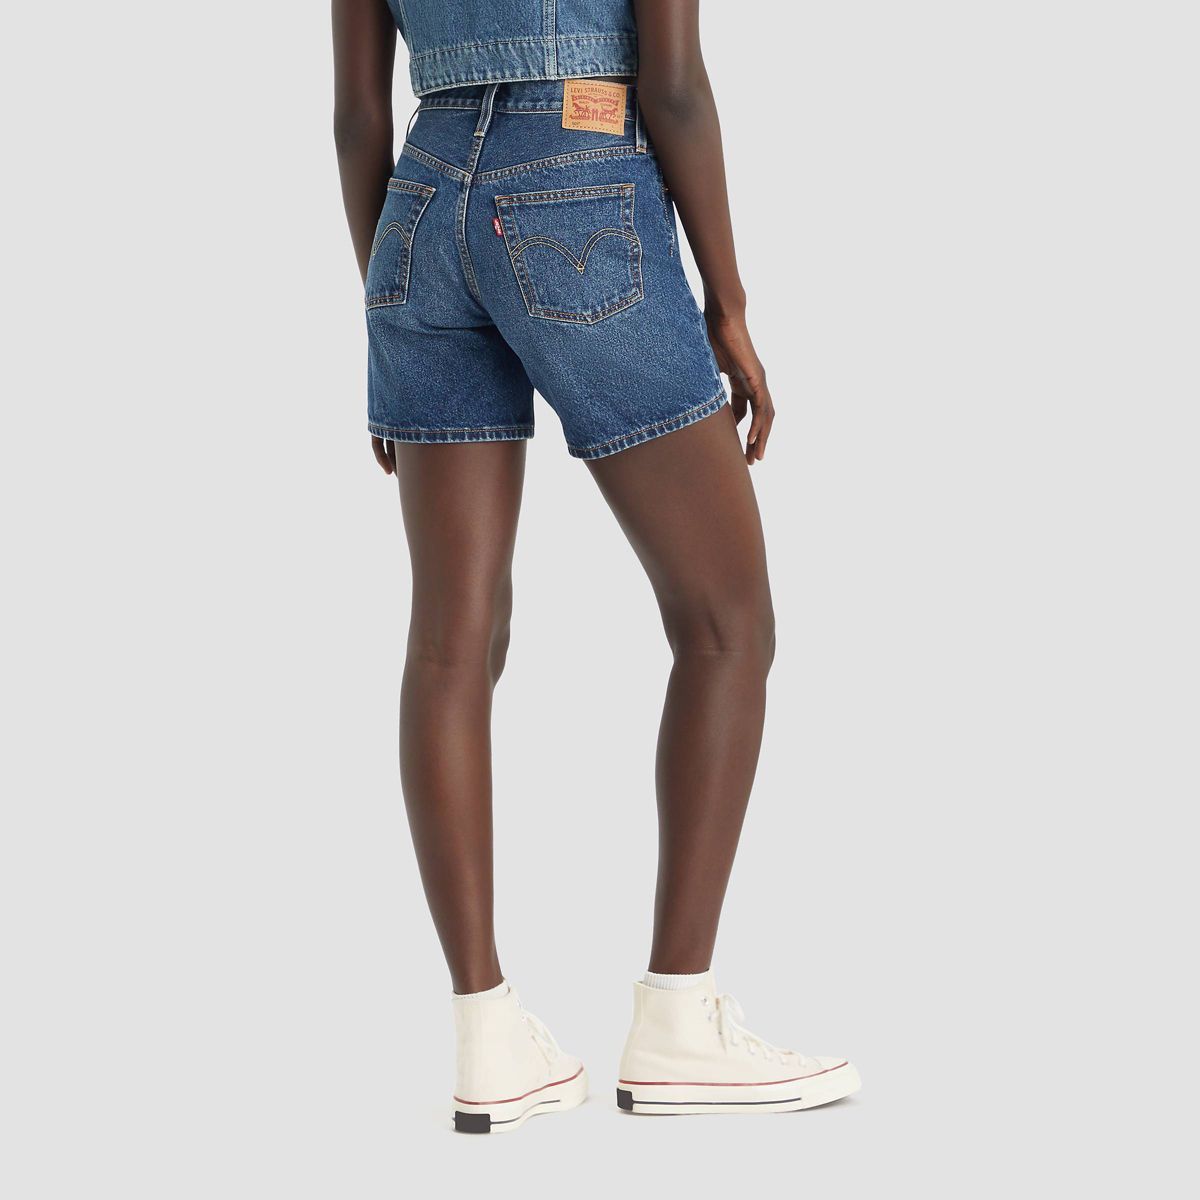 Levi's 501® Mid Thigh Women's Jean Shorts | Target